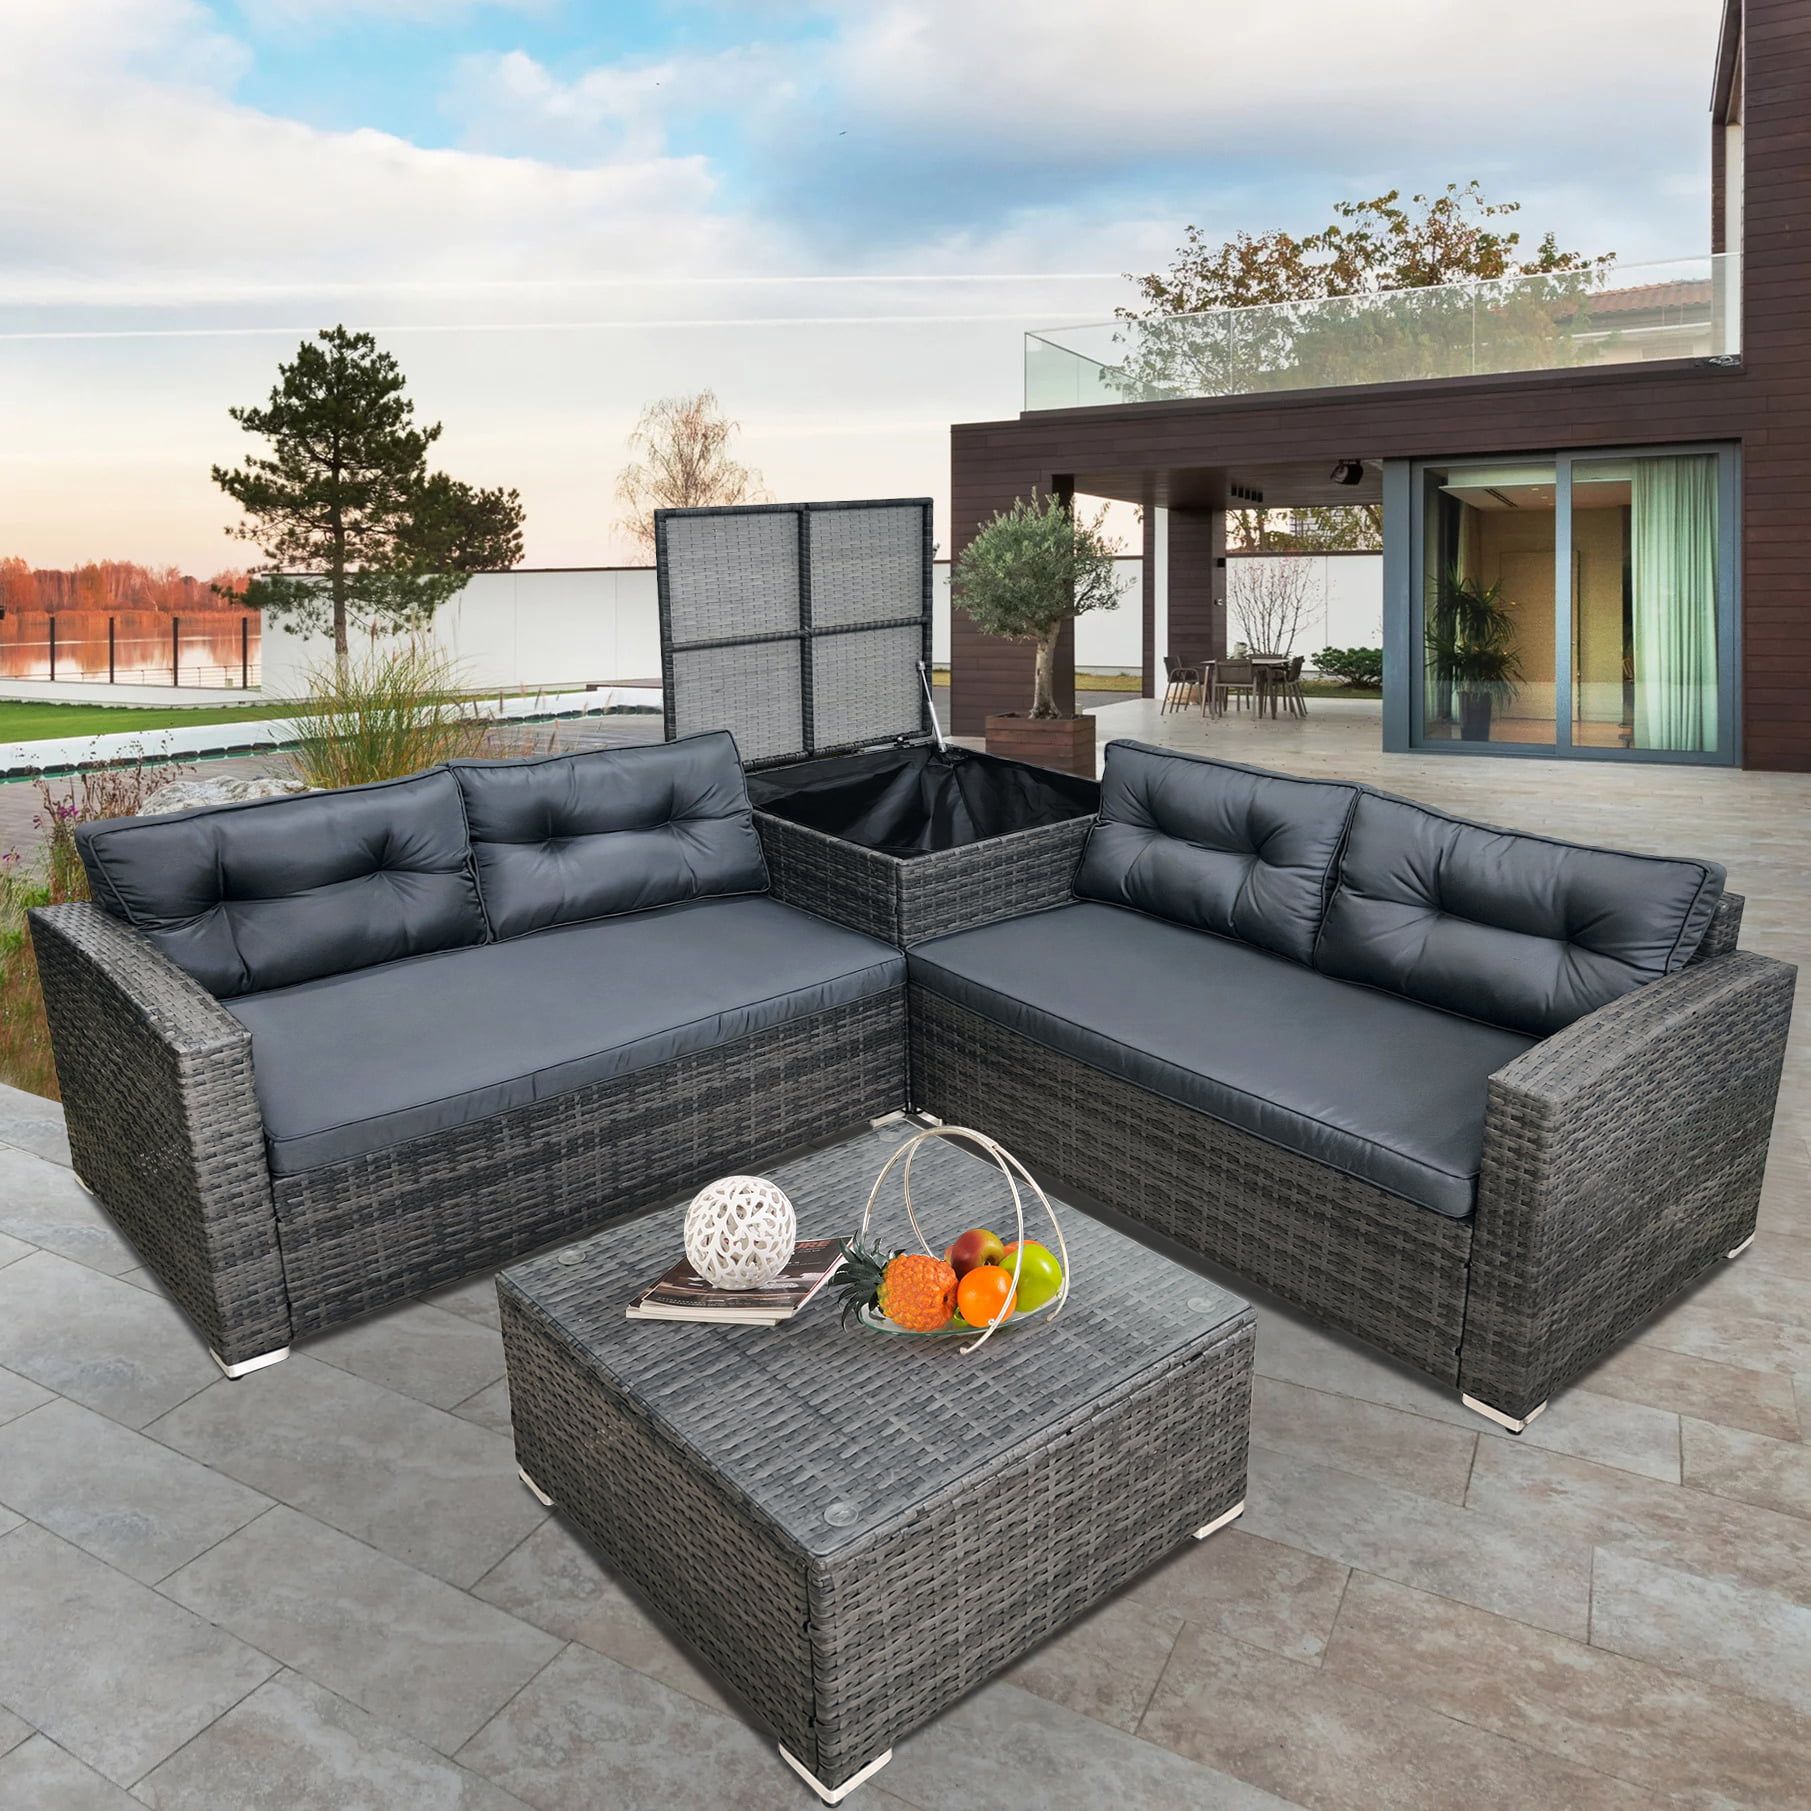 Rattan Wicker Patio Furniture, 4 Piece Outdoor Conversation Set With Storage  Ottoman, All Weather Sectional Sofa Set With Gray Cushions And Table For  Backyard, Porch, Garden, Poolside,l4537 – Walmart For Storage Table For Backyard, Garden, Porch (View 10 of 15)